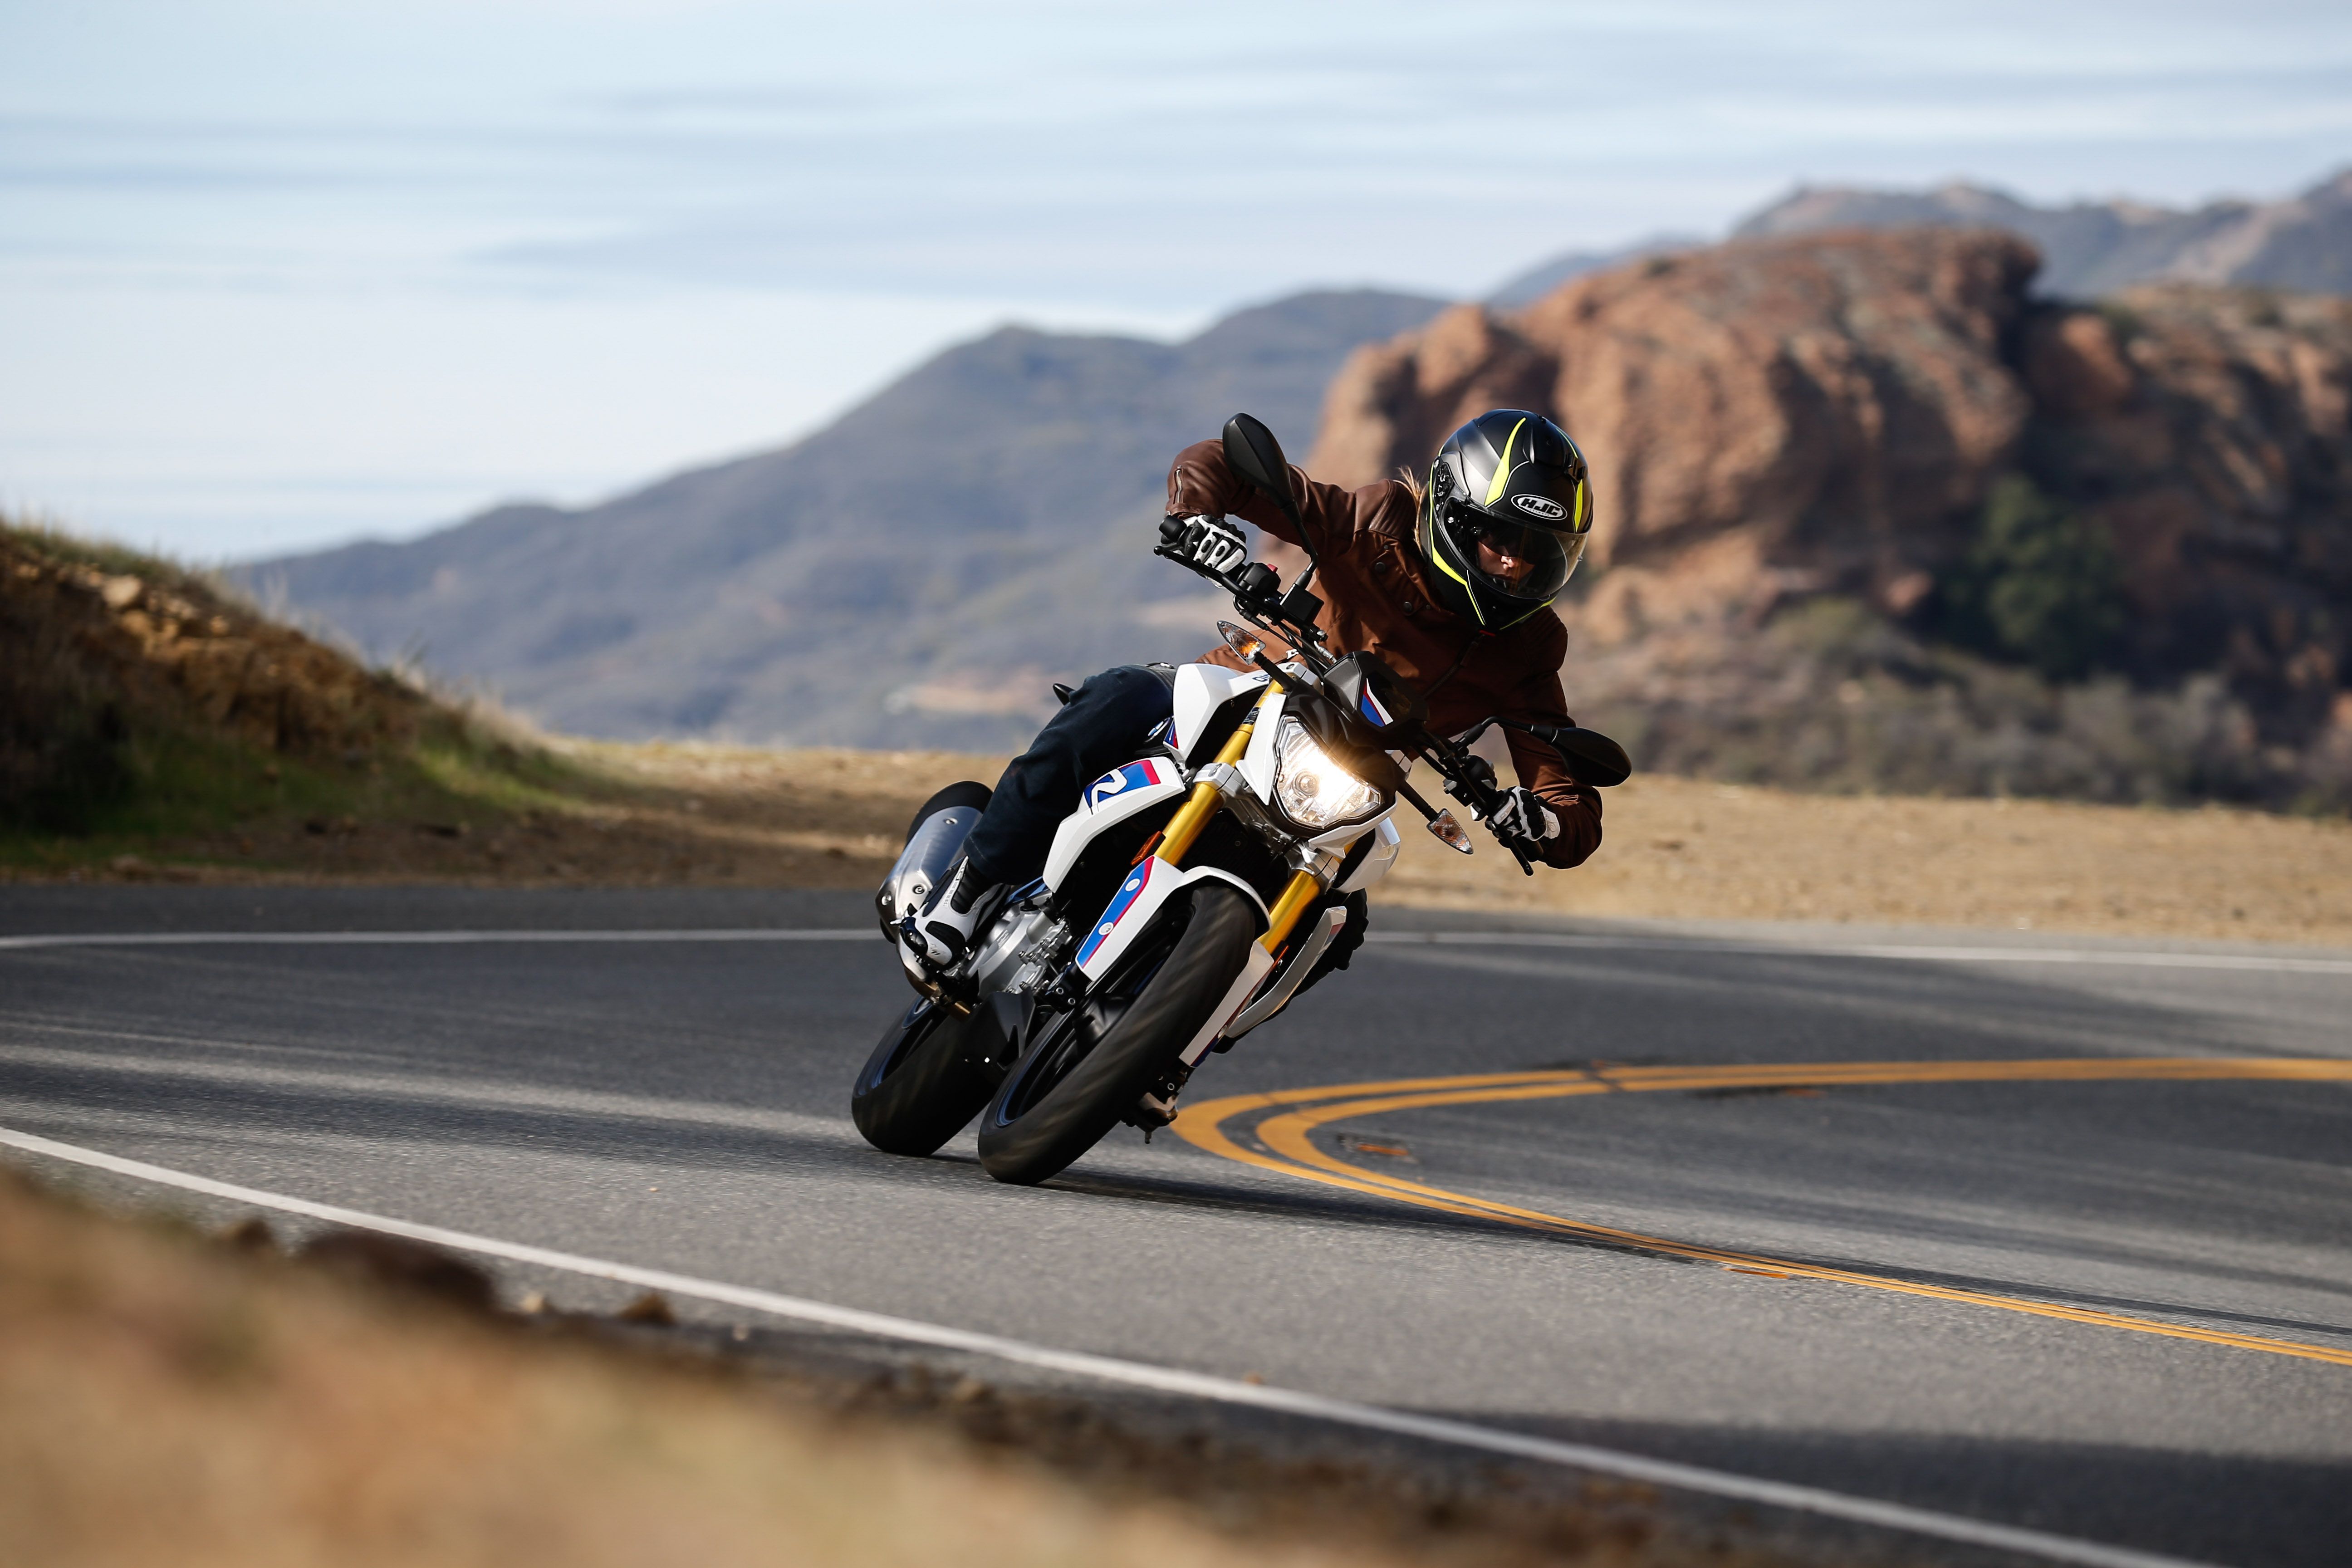 Anna-Larissa Redbinger owning the Snake on the G310R - BMW's first motorcycle made in India